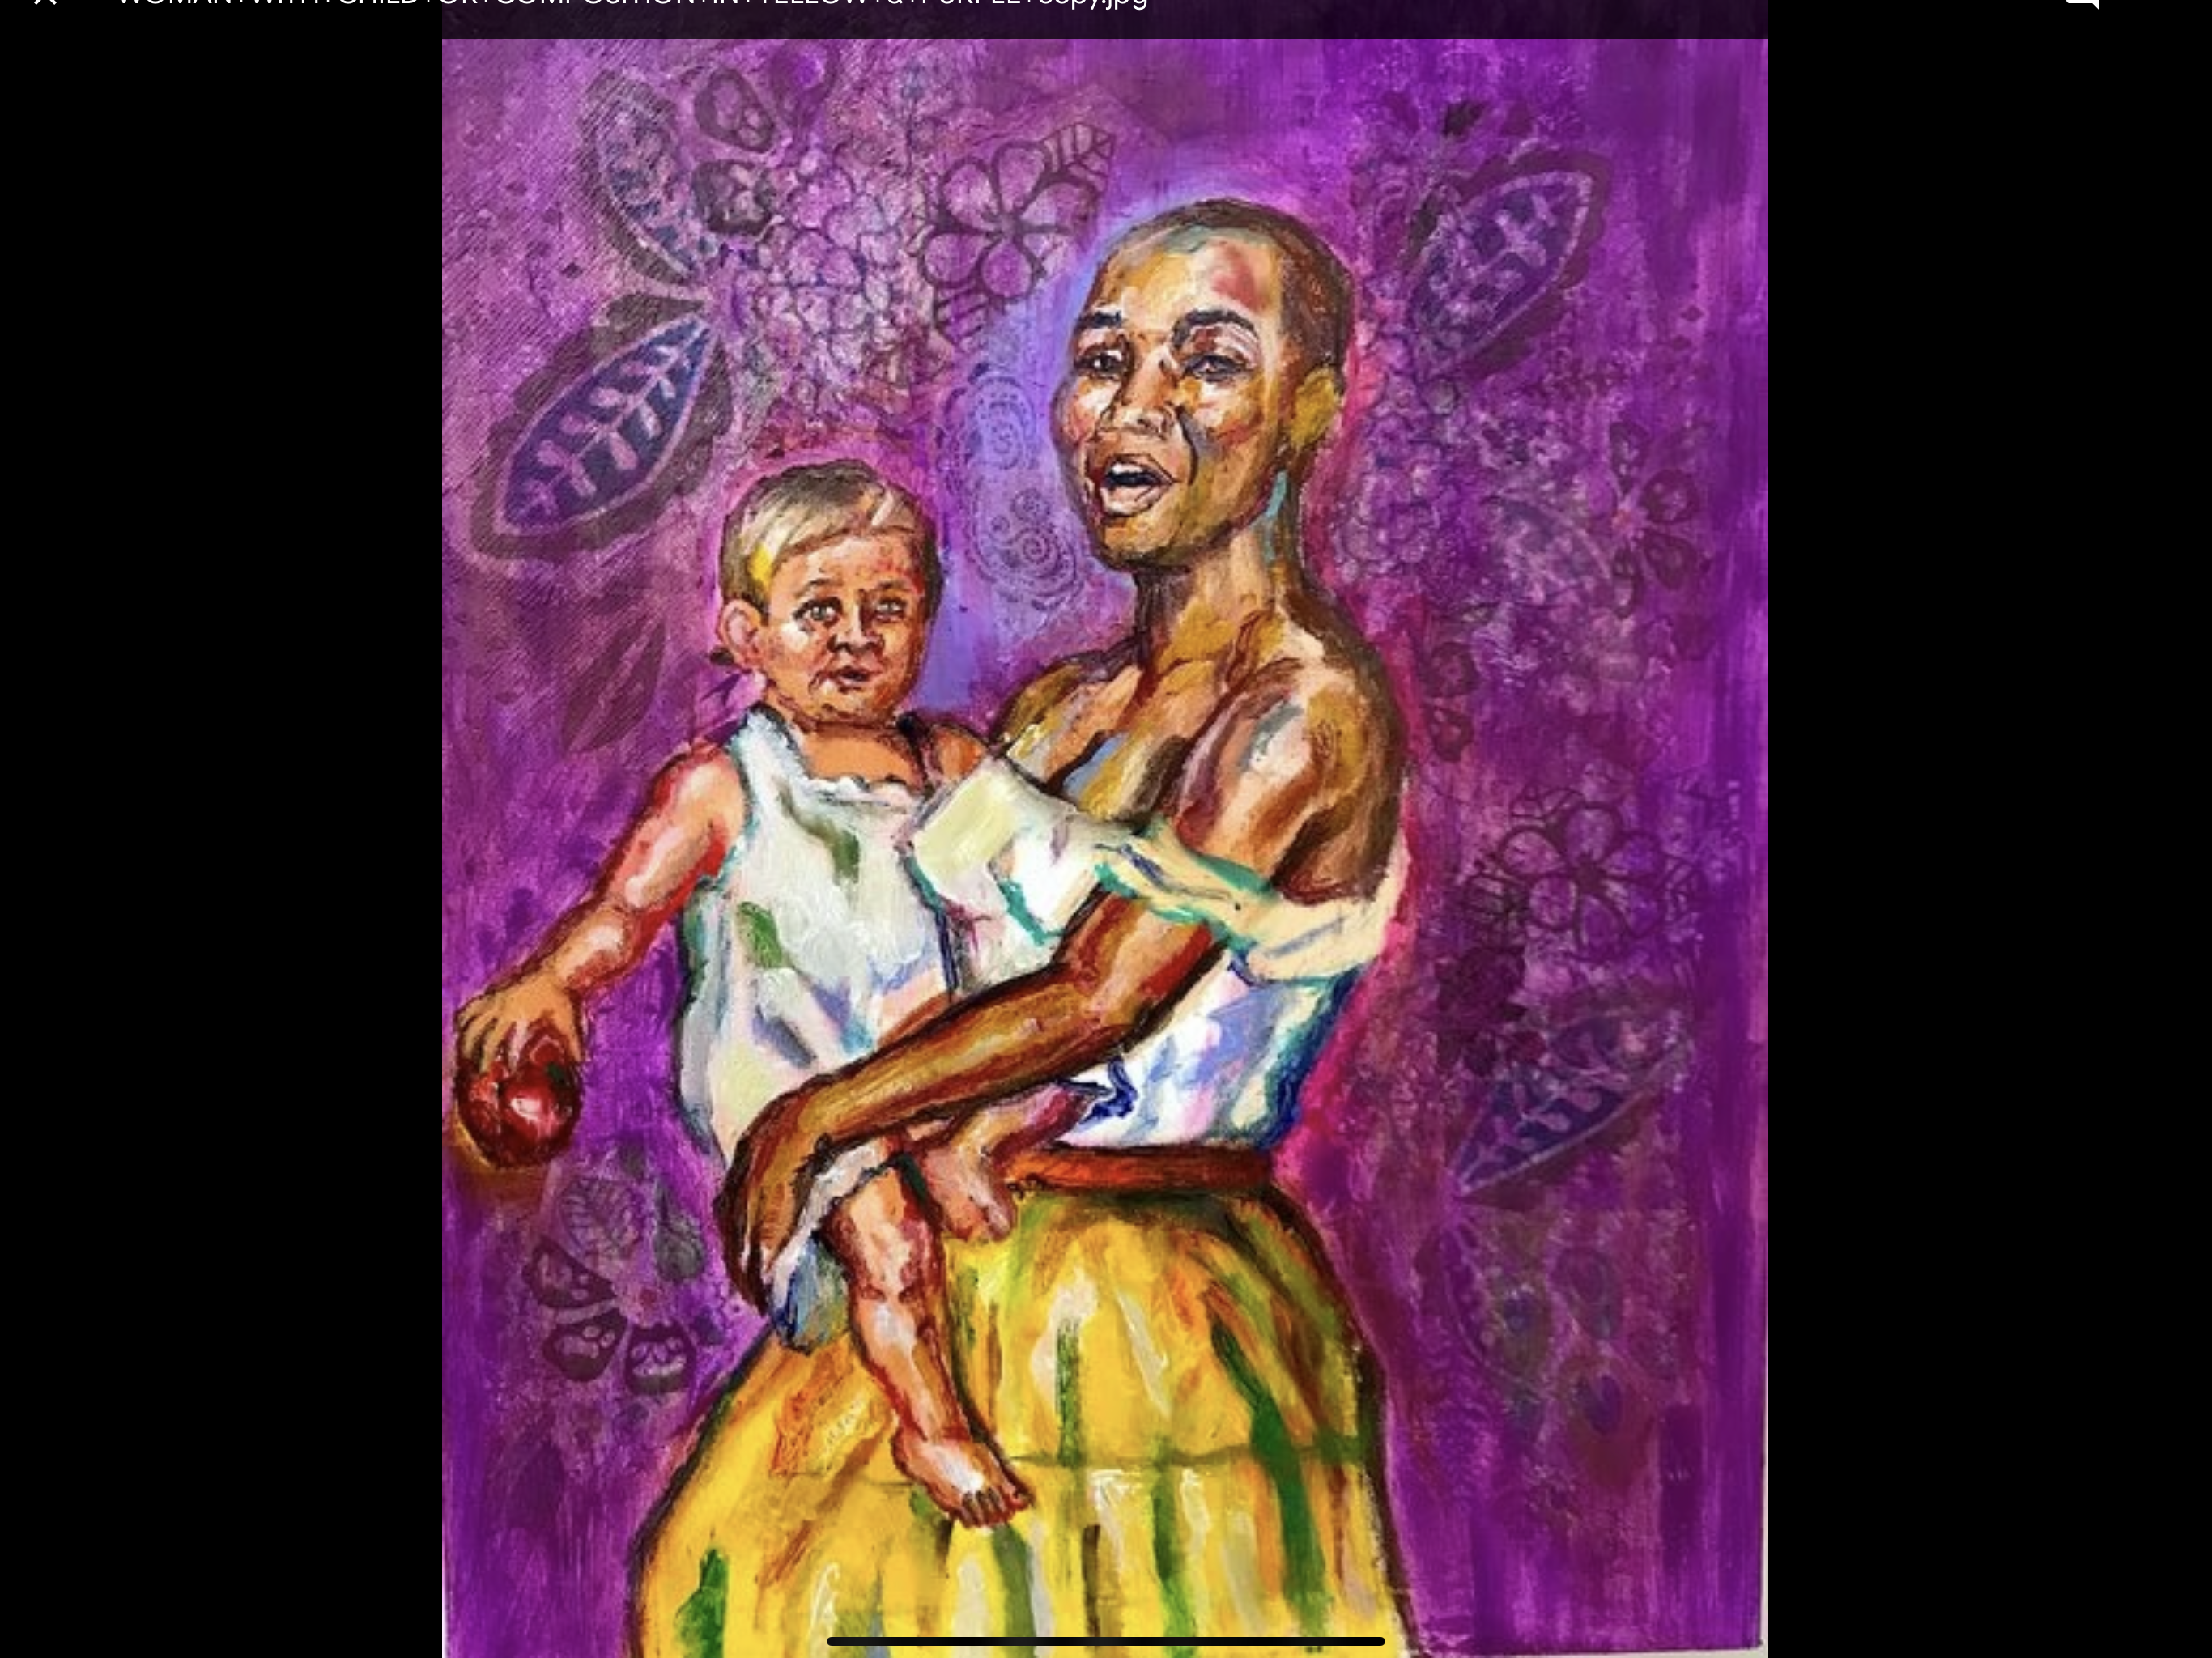  Painting by Ricardo Osmondo Francis: "Woman With Child" or "Composition in Yellow and Purple" Painting by Ricardo Osmondo Francis: "Woman With Child" or "Composition in Yellow and Purple"